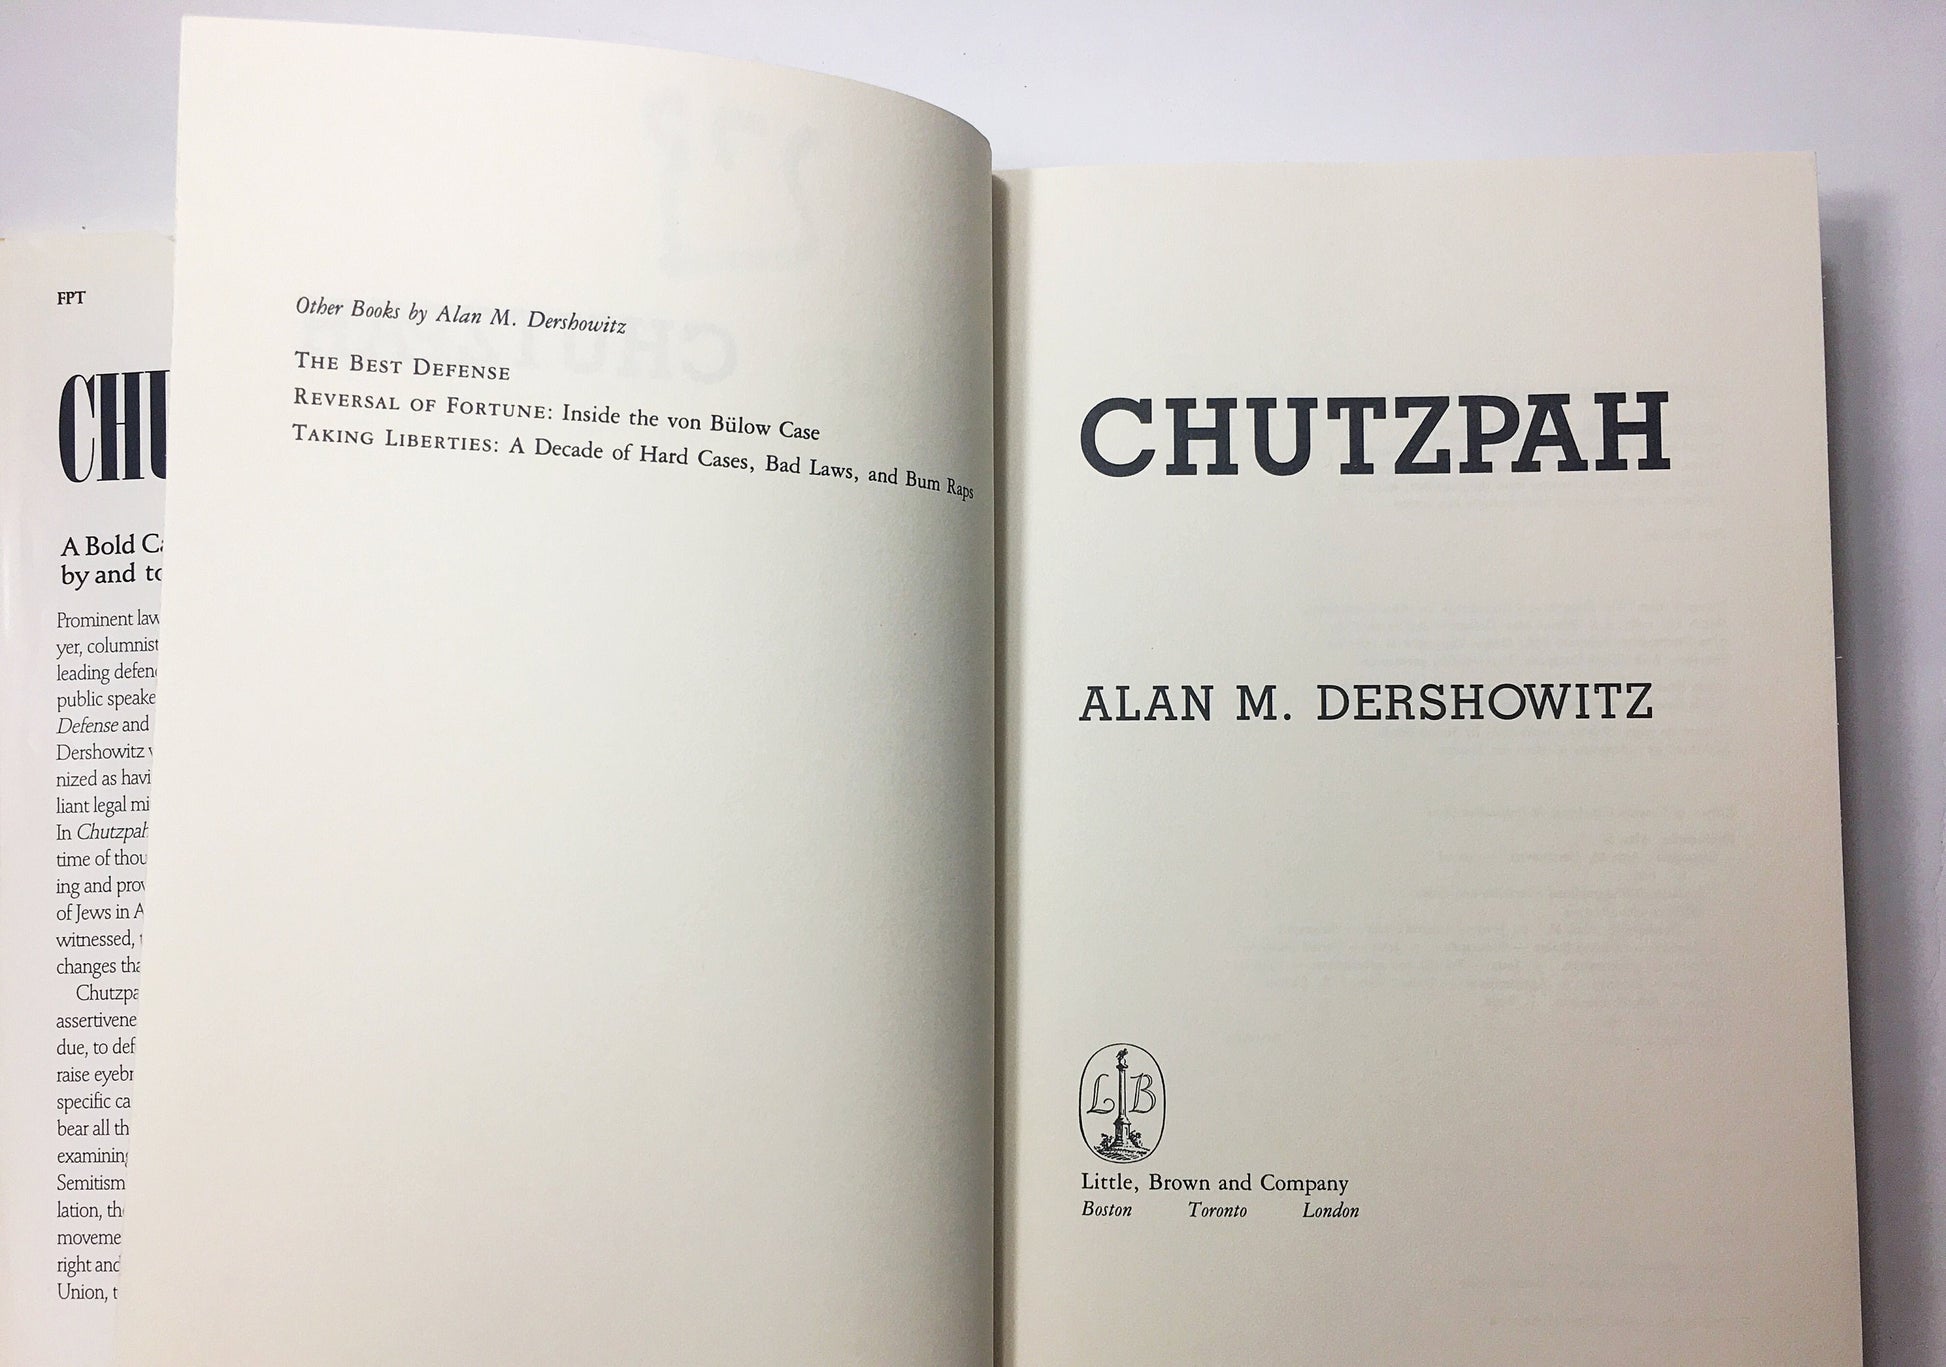 Chutzpah by Alan Dershowitz circa 1991. FIRST EDITION vintage book about expressing Judaism historically and today. Jewish identity. Gift